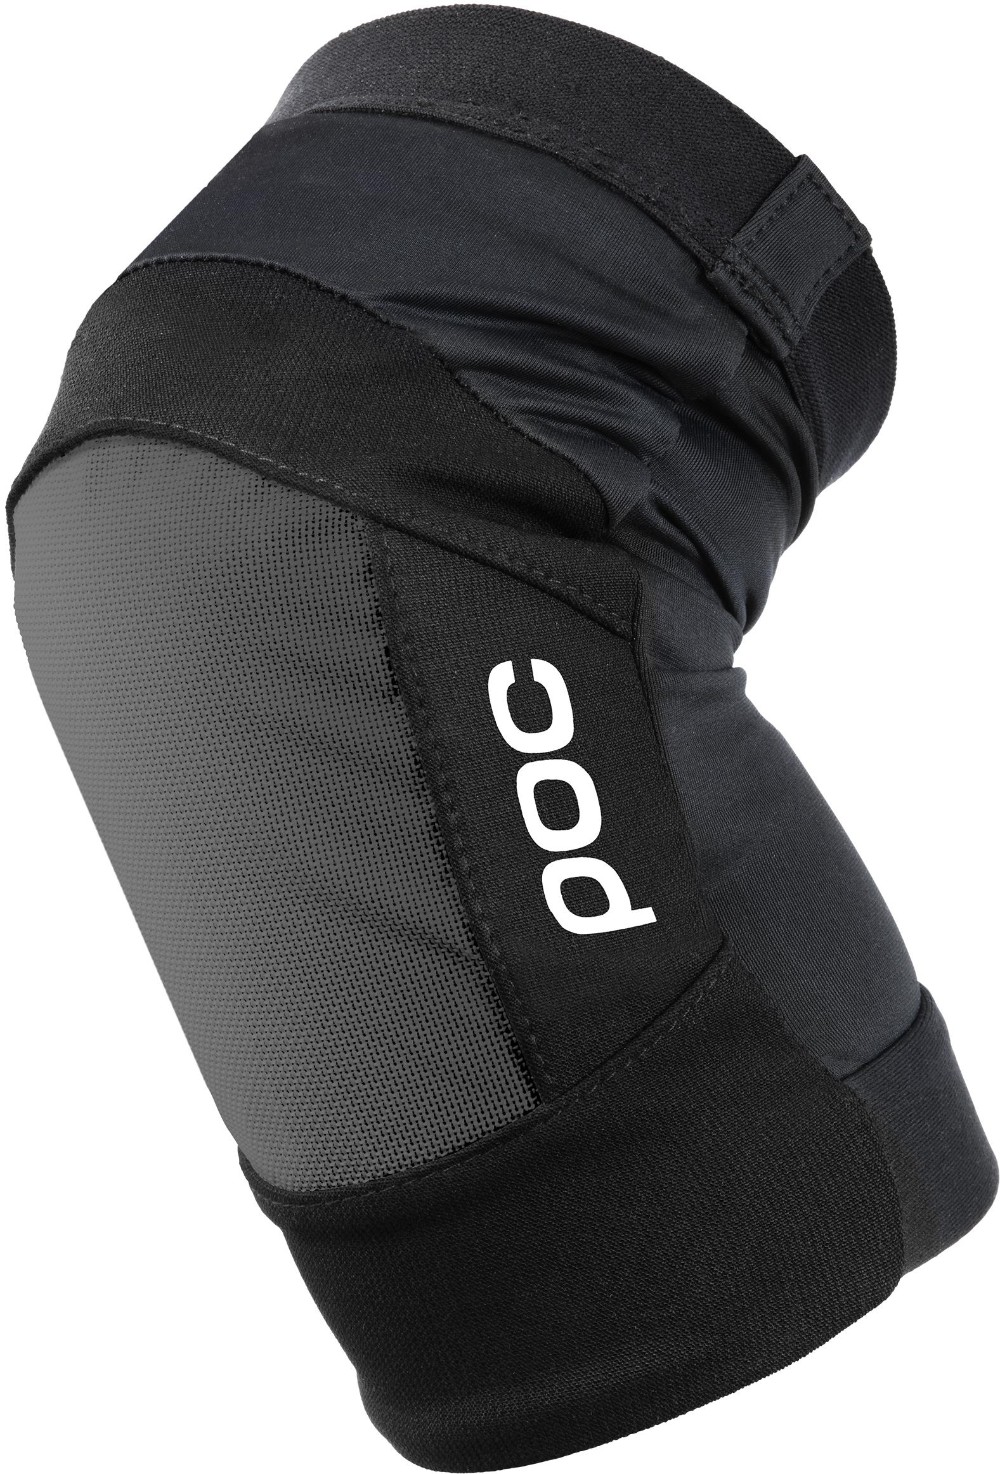 Joint VPD System Knee Guards image 0